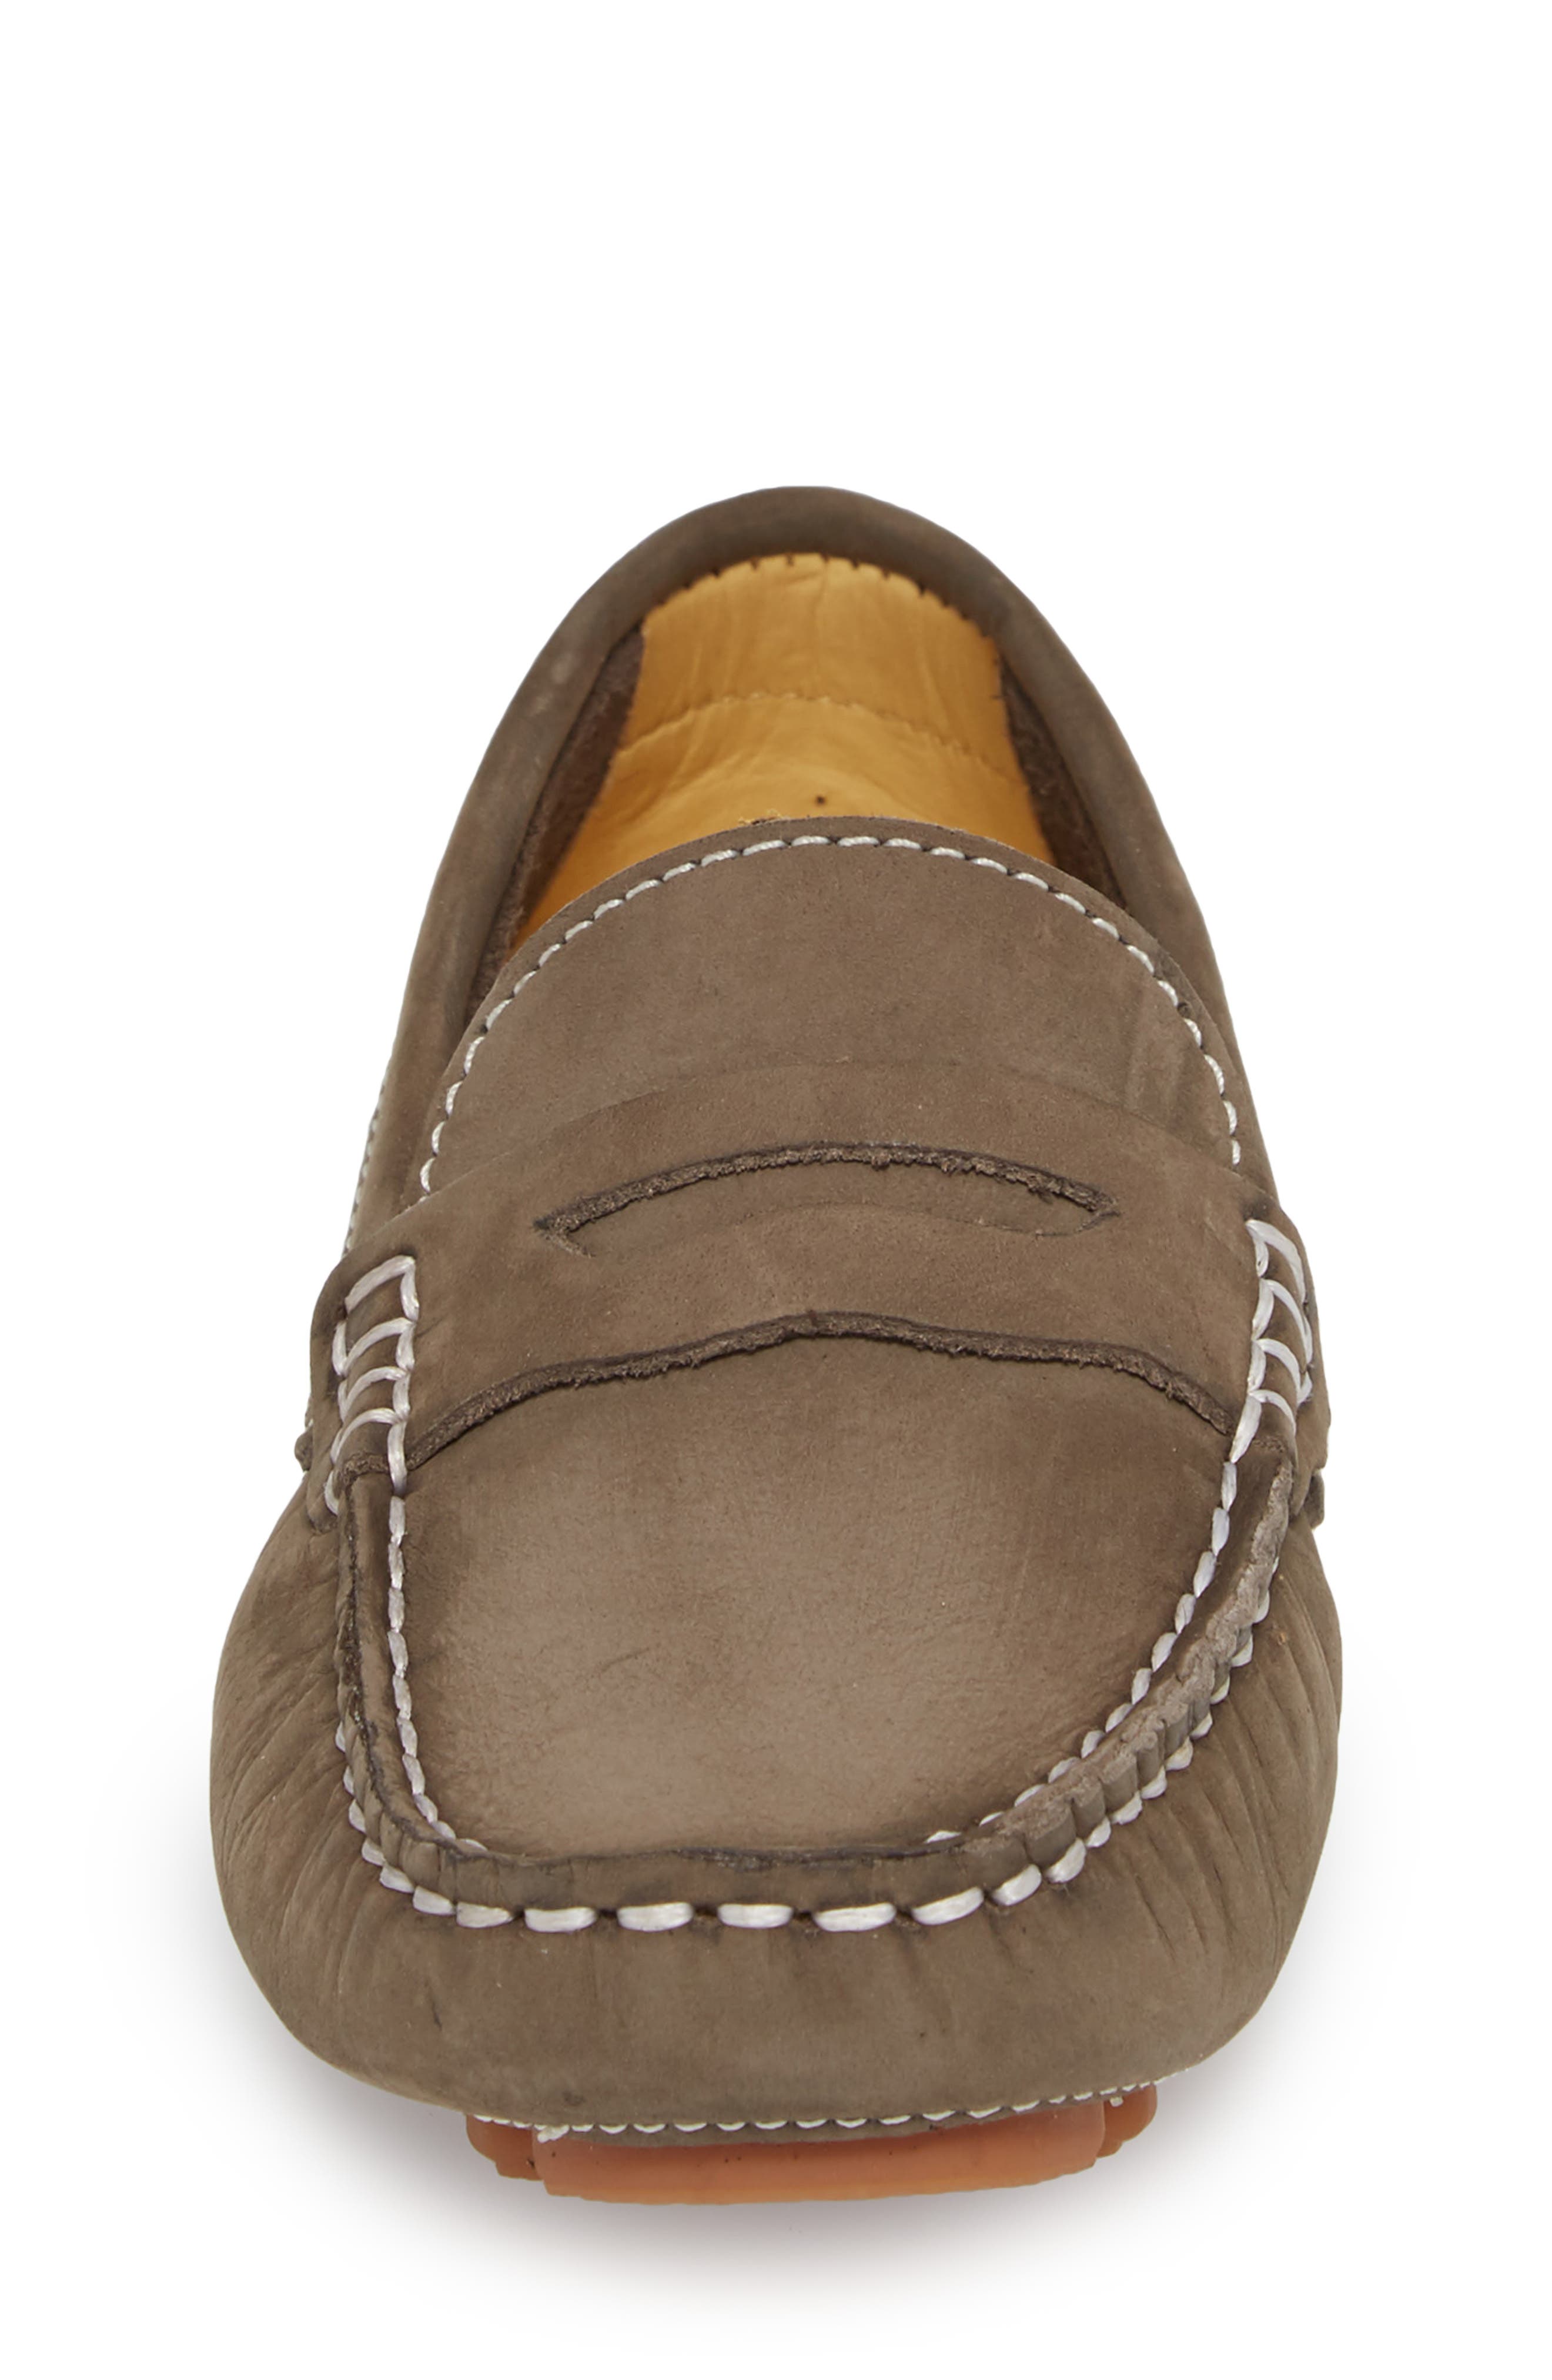 tucker and tate moccasins